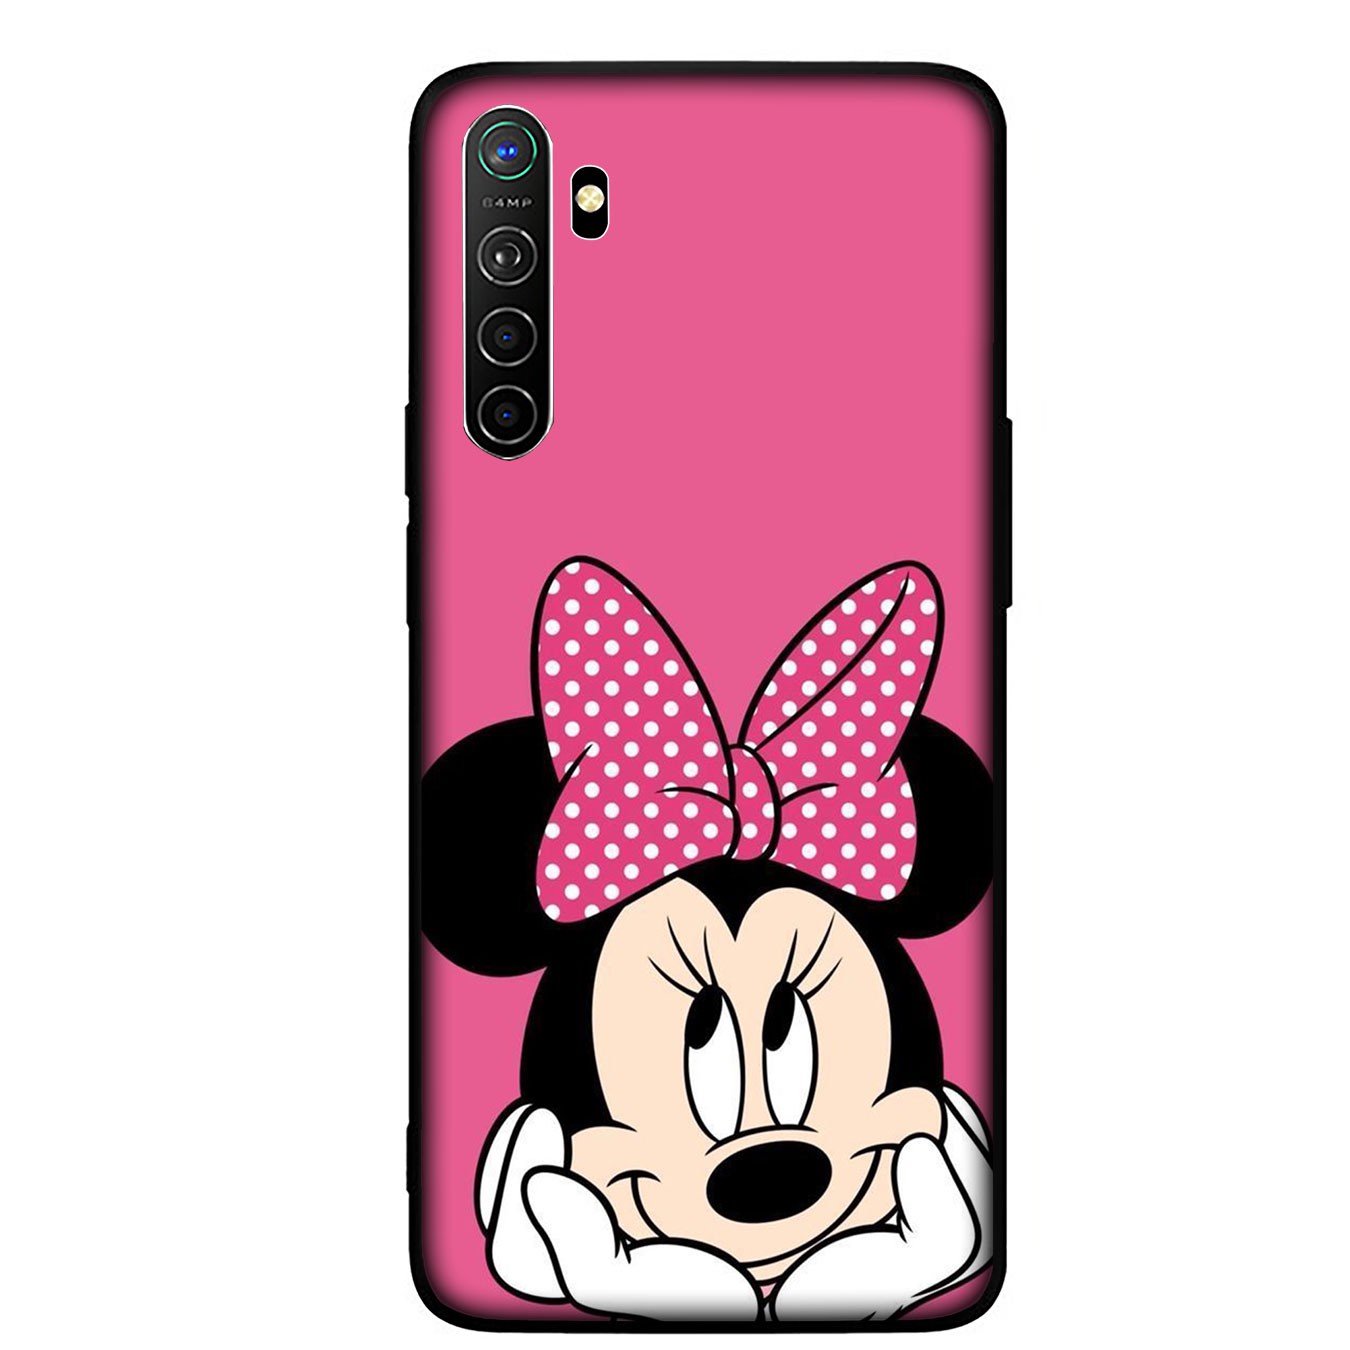 Samsung Galaxy A02S J2 J4 J5 J6 Plus J7 Prime A02 M02 j6+ A42 + Casing Soft Silicone Mickey Mouse Cute Phone Case